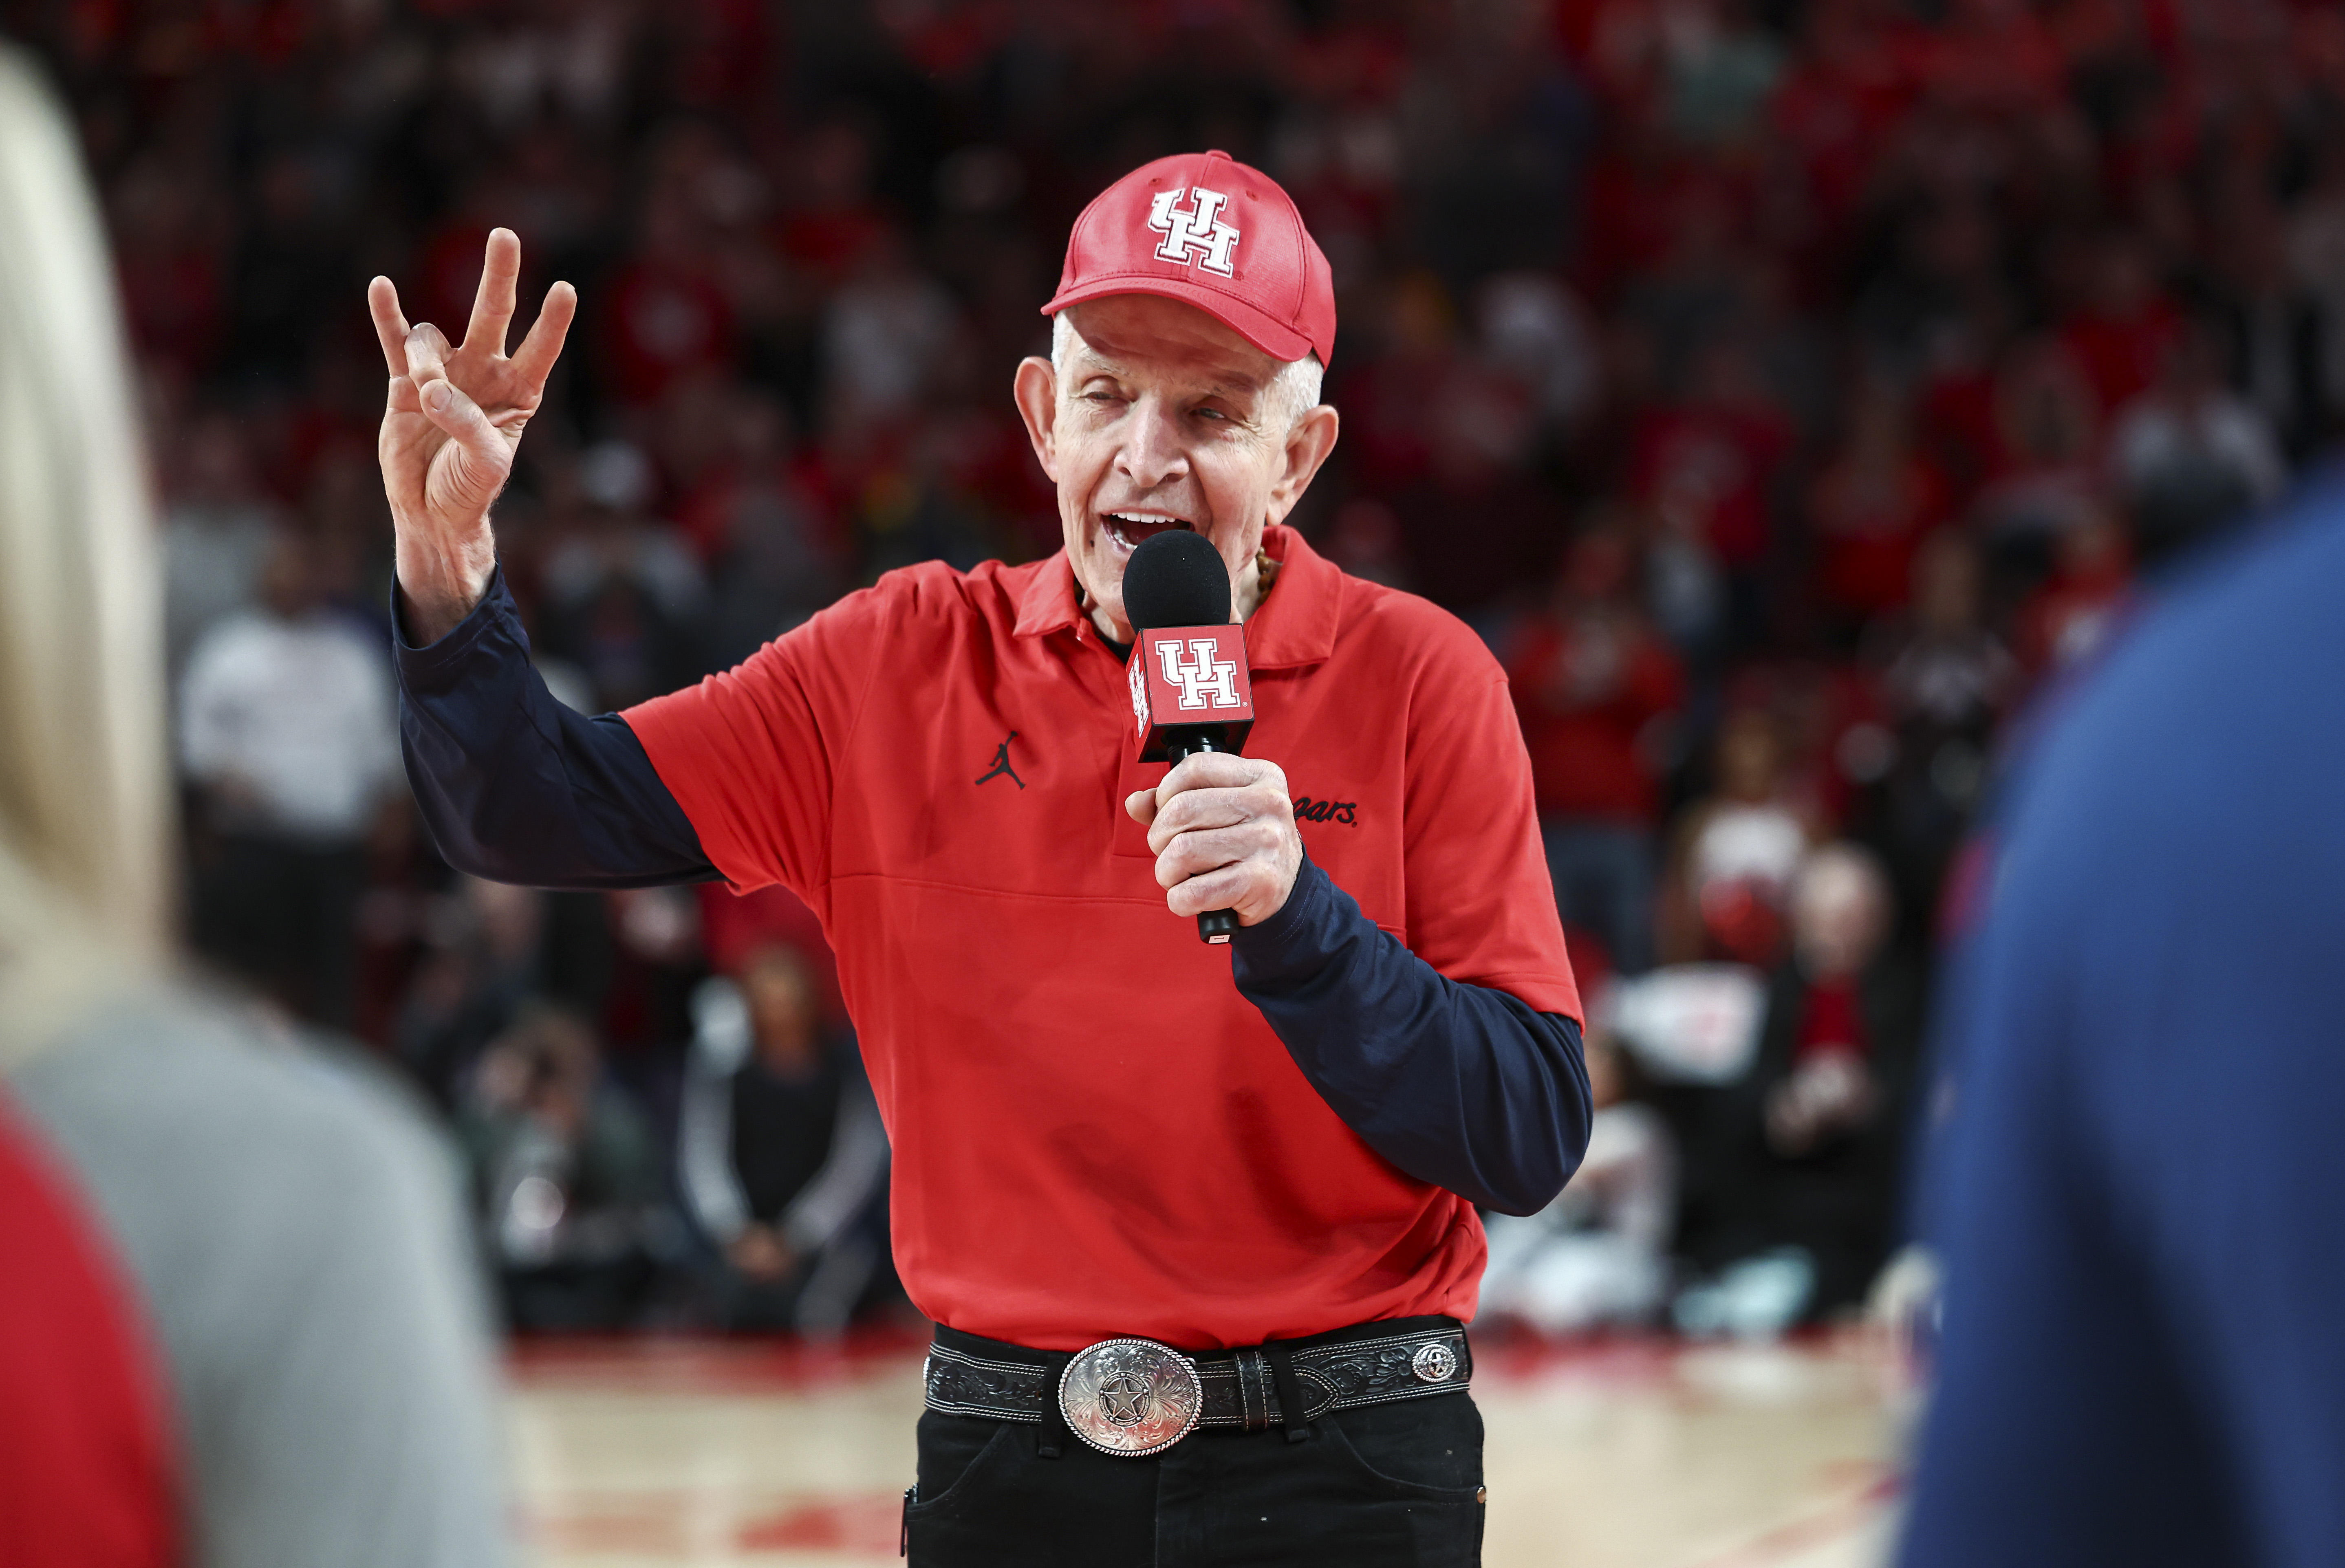 Mattress Mack tossed a combined $4.05 million on Houston to win March Madness and the payout is astronomical